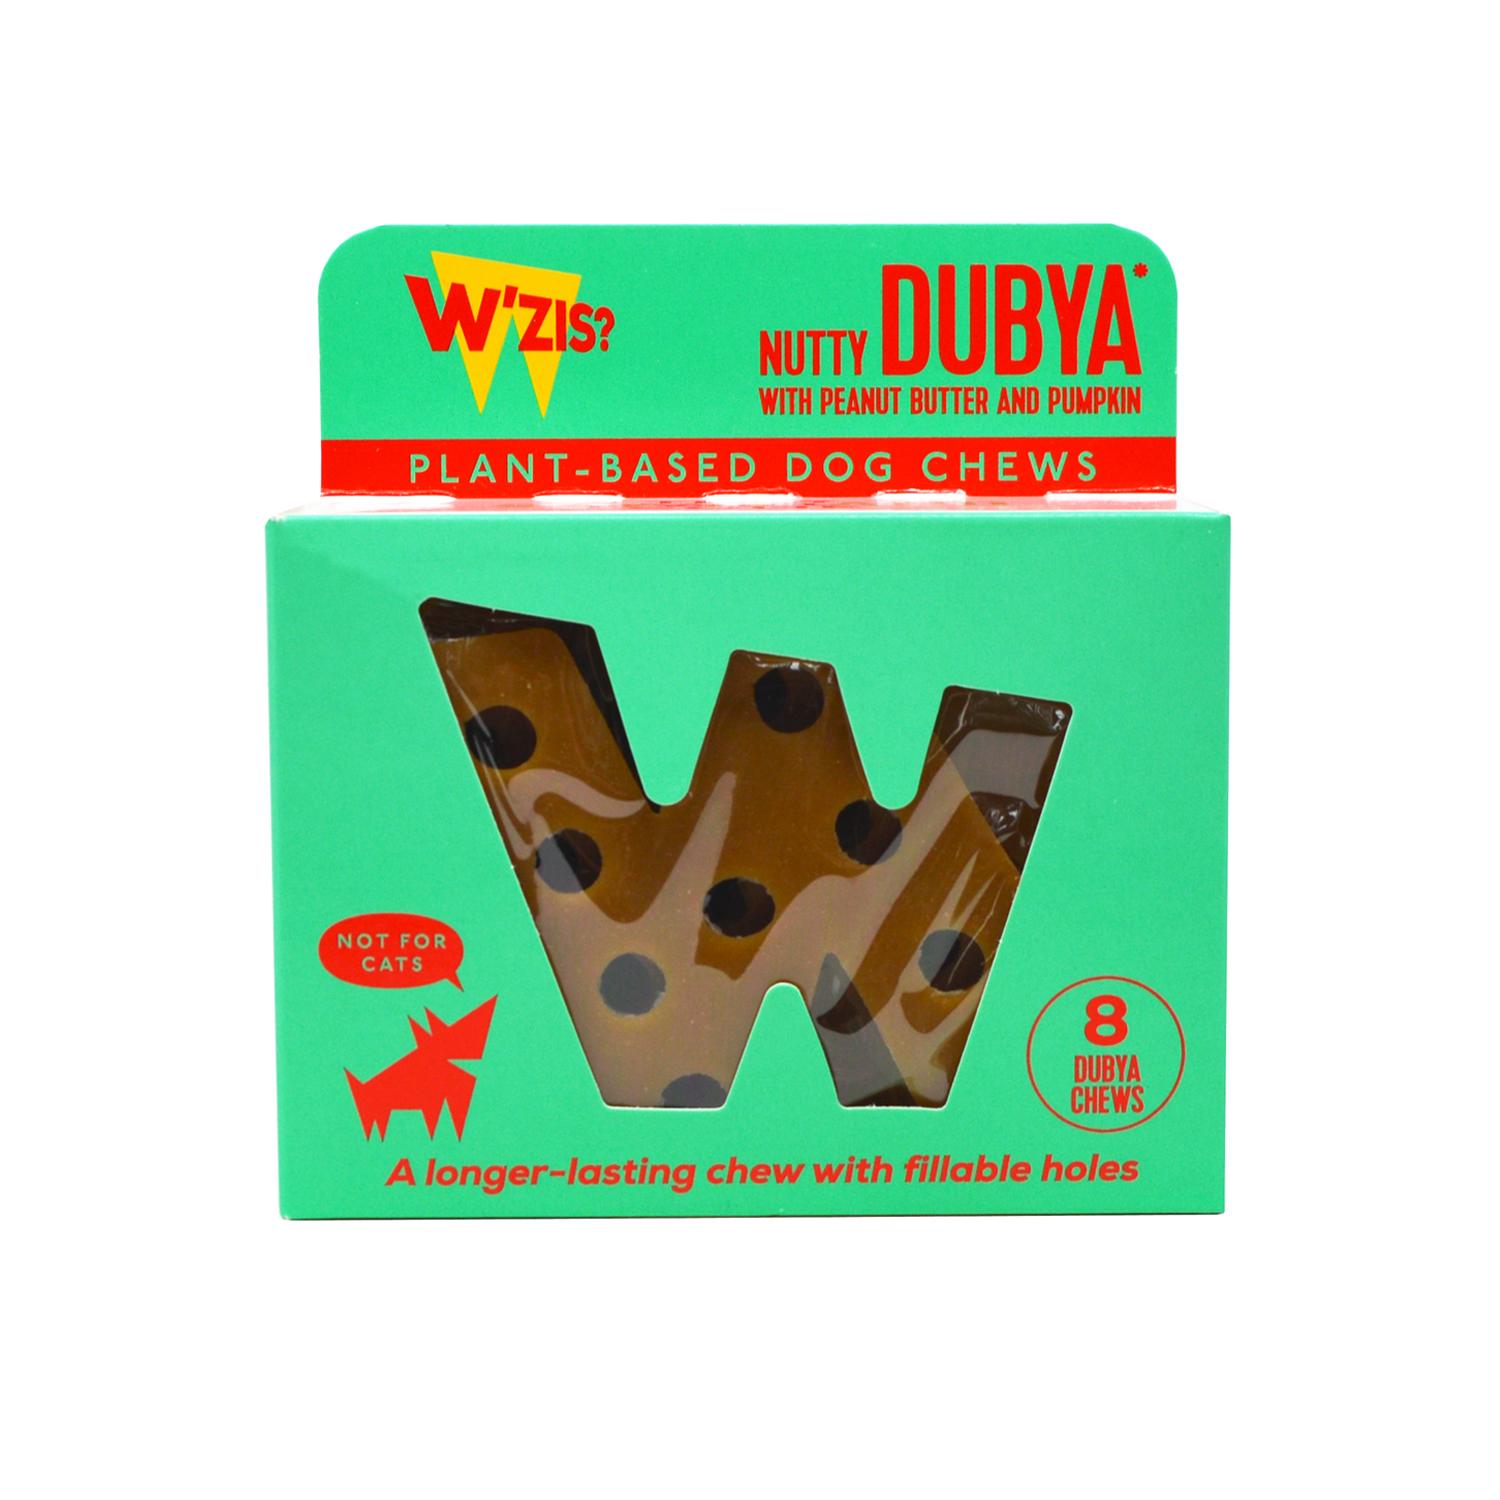 Front of a pack of W'ZIS? Nutty dubya small sized vegan dog chews